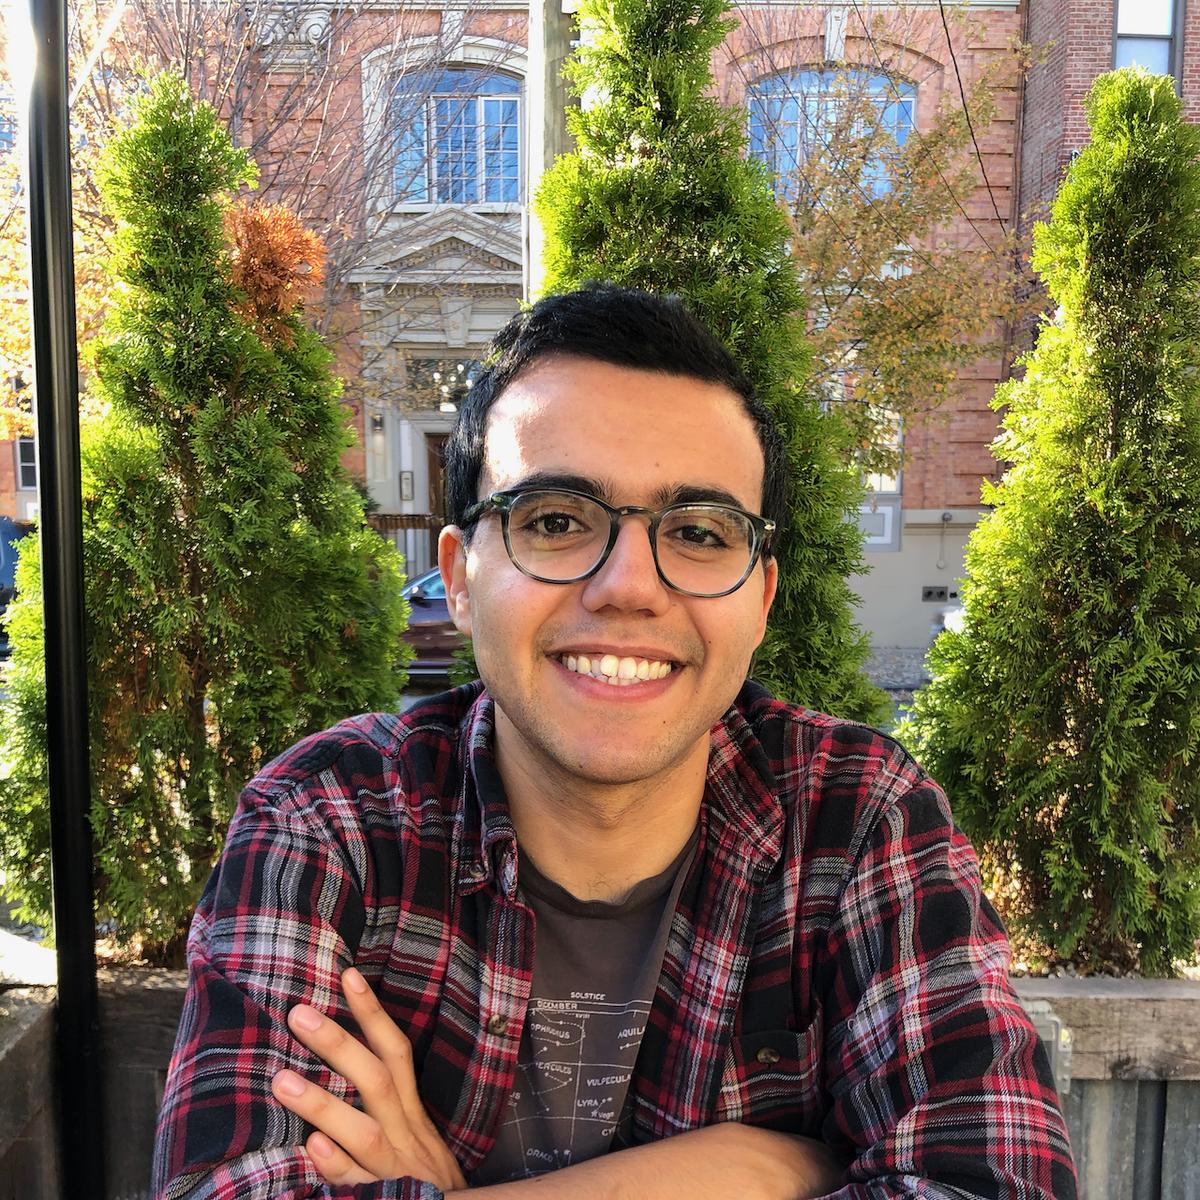 An image of Danny Ayoub, a man with short black hair and glasses, smiling at the camera sitting at a brown wooden table. His elbows are resting on the table and his arms are crossed. A few tall landscaping trees stand in the background.